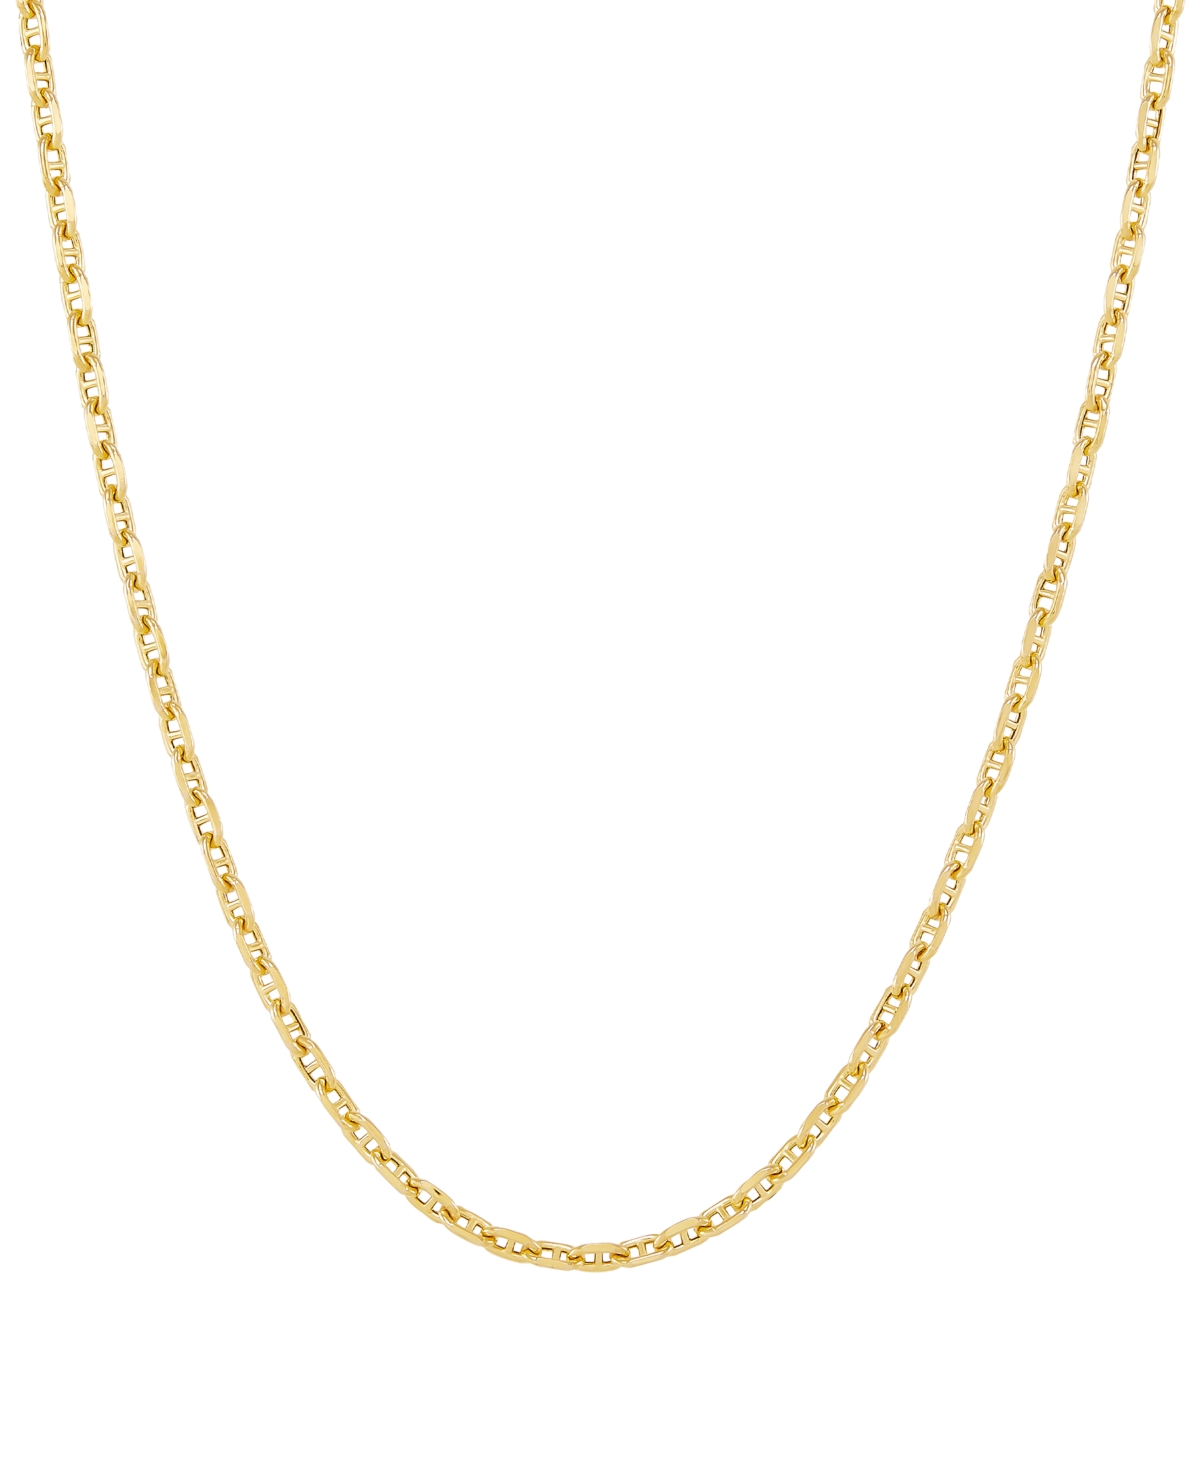 Mariner Link 22" Chain Necklace (2-3/8mm) in 10k Gold - Yellow Gold